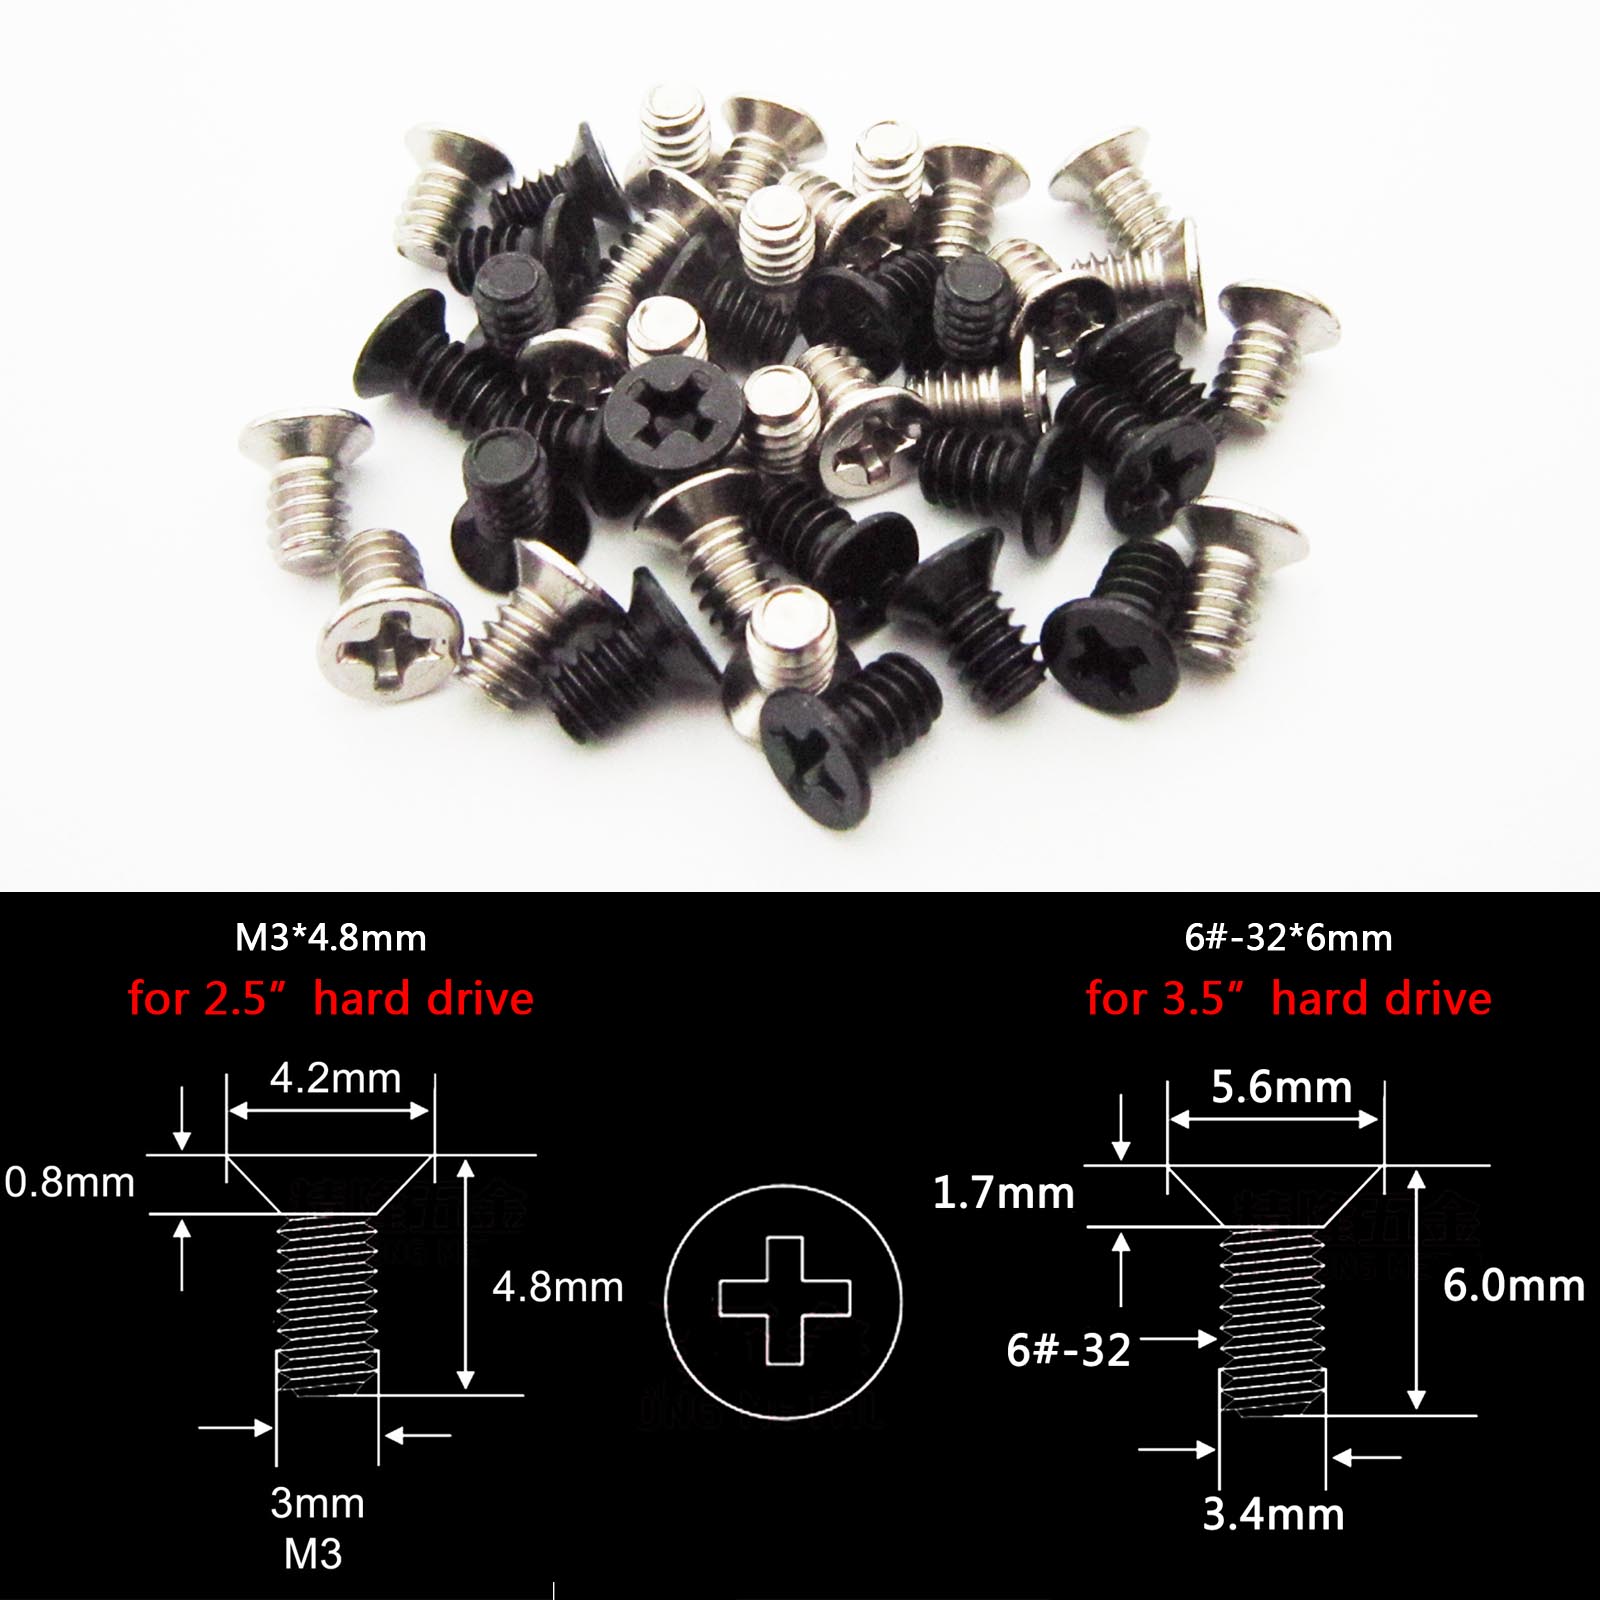 100 pcs M3 x 6mm Phillips Pan Head Screws for 2.5" HDD SSD DVD-ROM Motherboard 